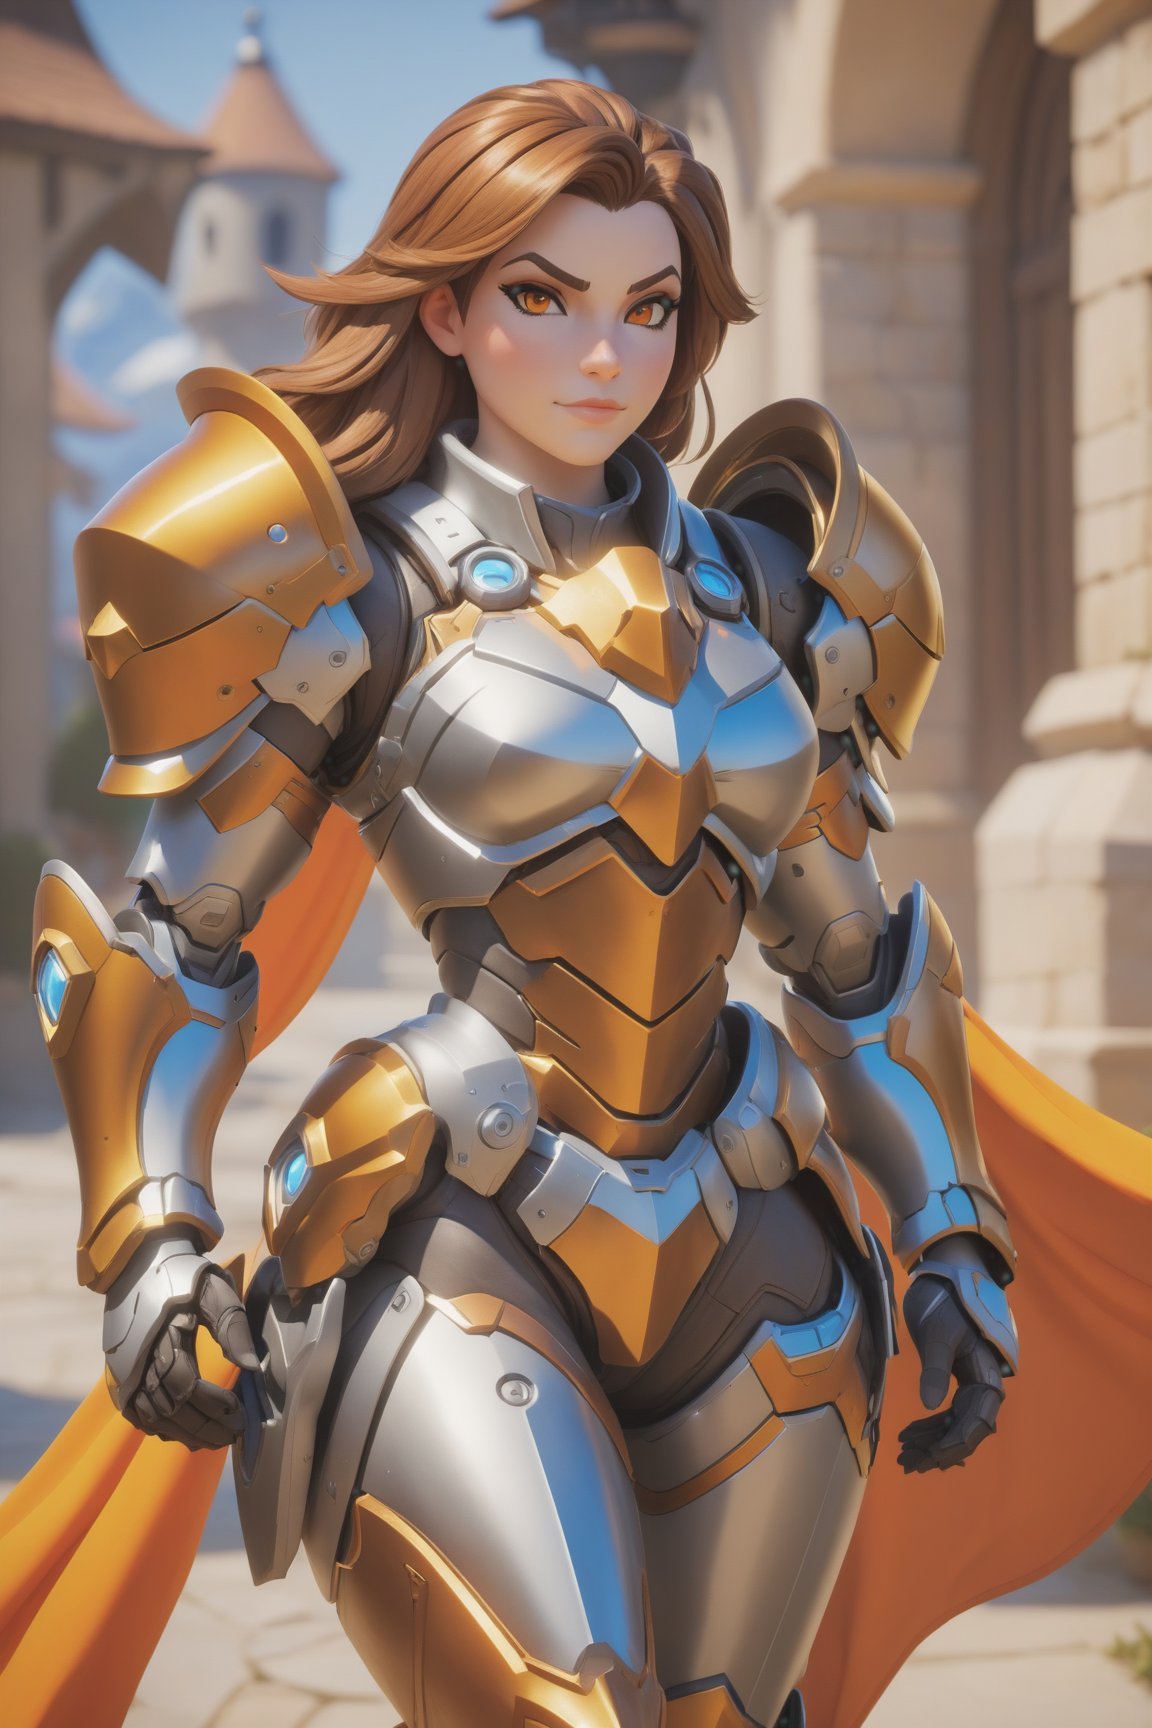 (best quality), (4K, HDR), ((Overwatch)), Paladin Brigitte, hourglass body, shiny armor, slightly strong physique , brown hair, bright orange eyes, might shield (various camera angles), fantasy style armor and clothing, fantasy, vibrant colors, 